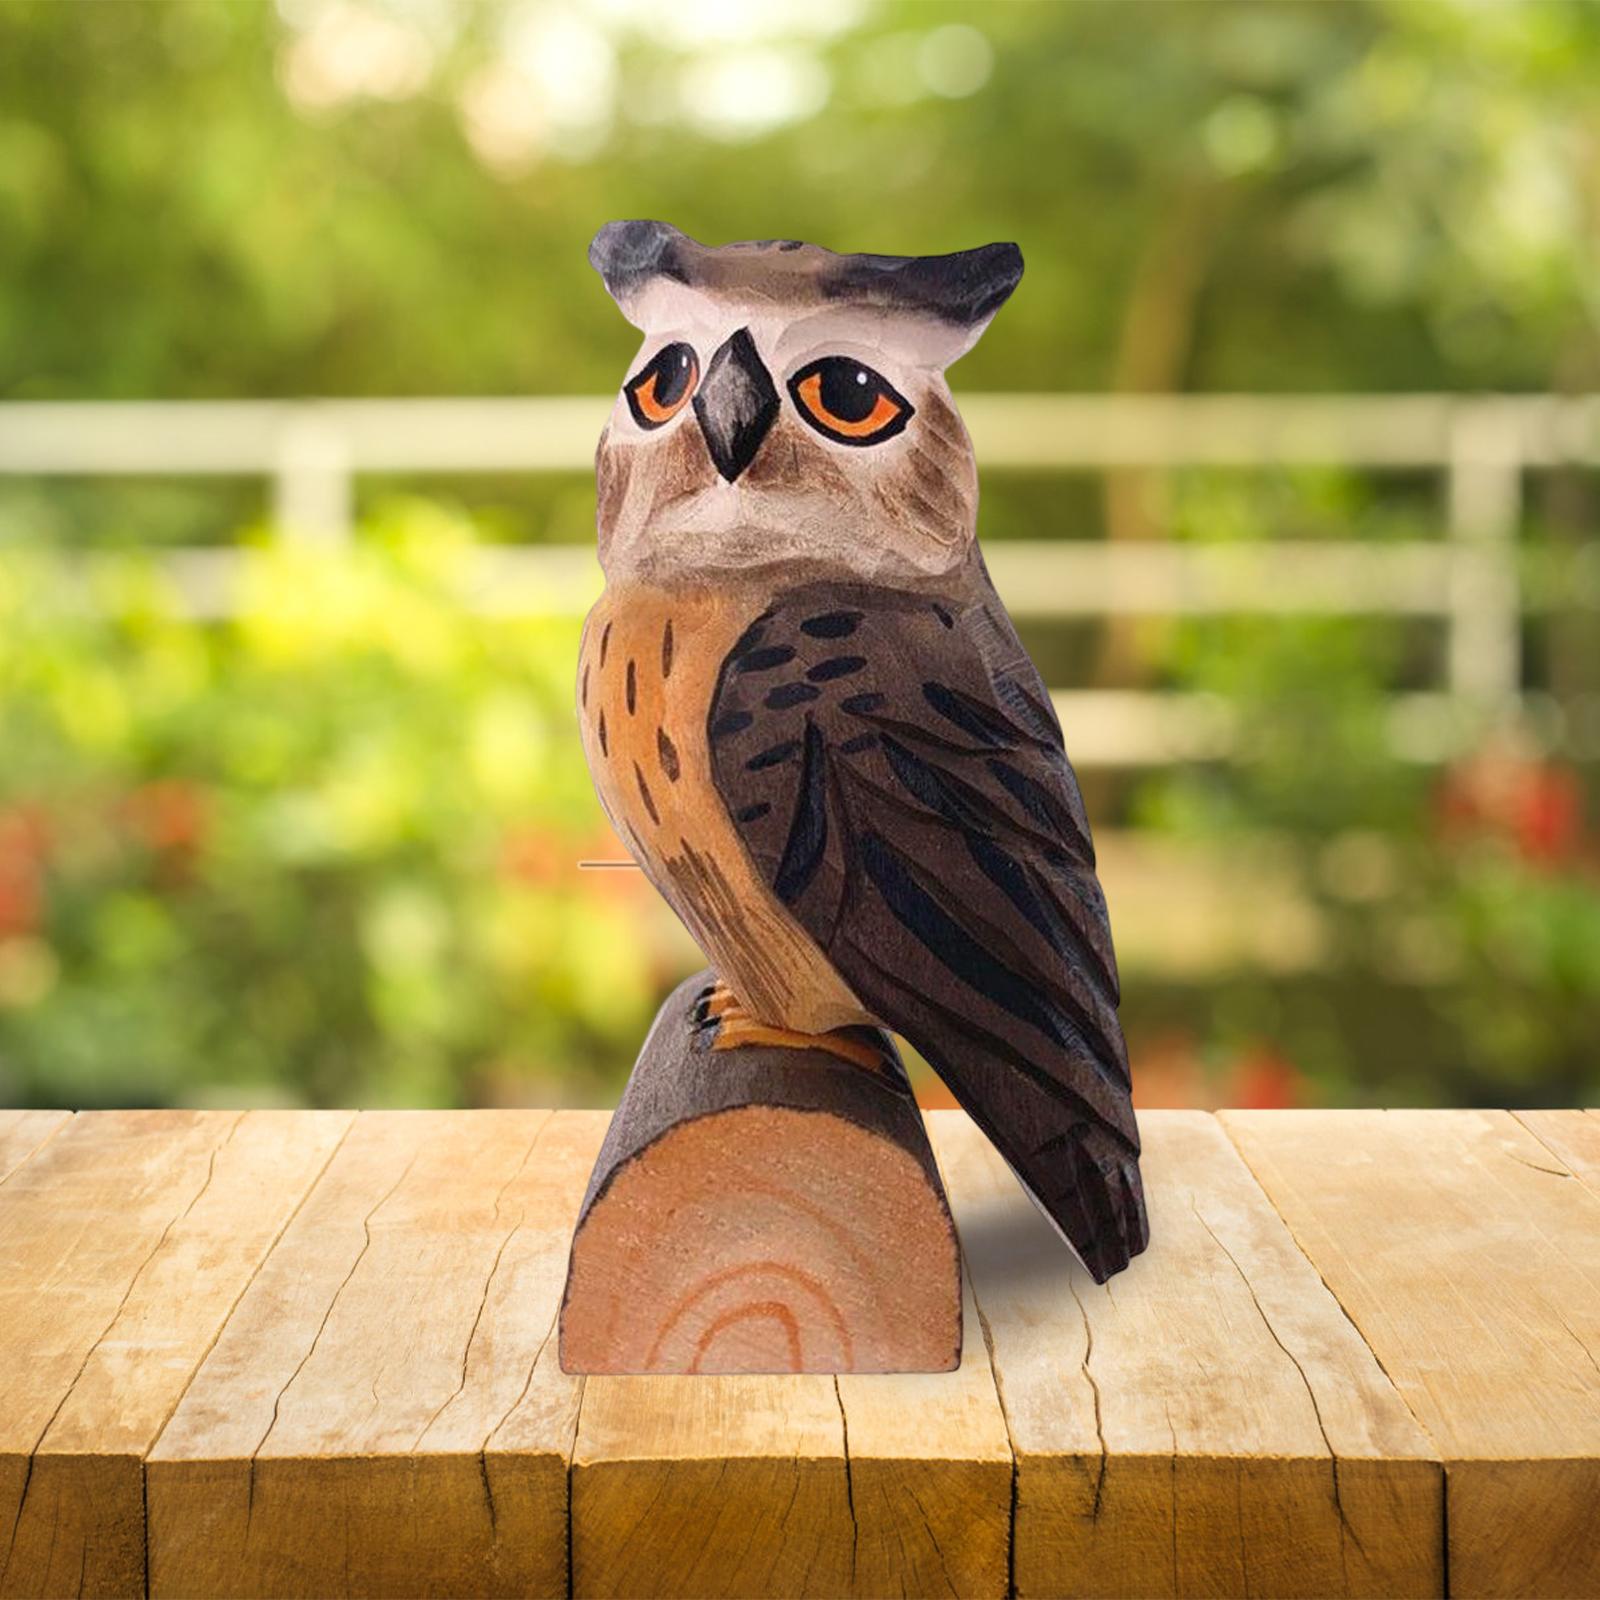 Owl Statue Sculpture Collectible Bird Figurine for Office Home brown